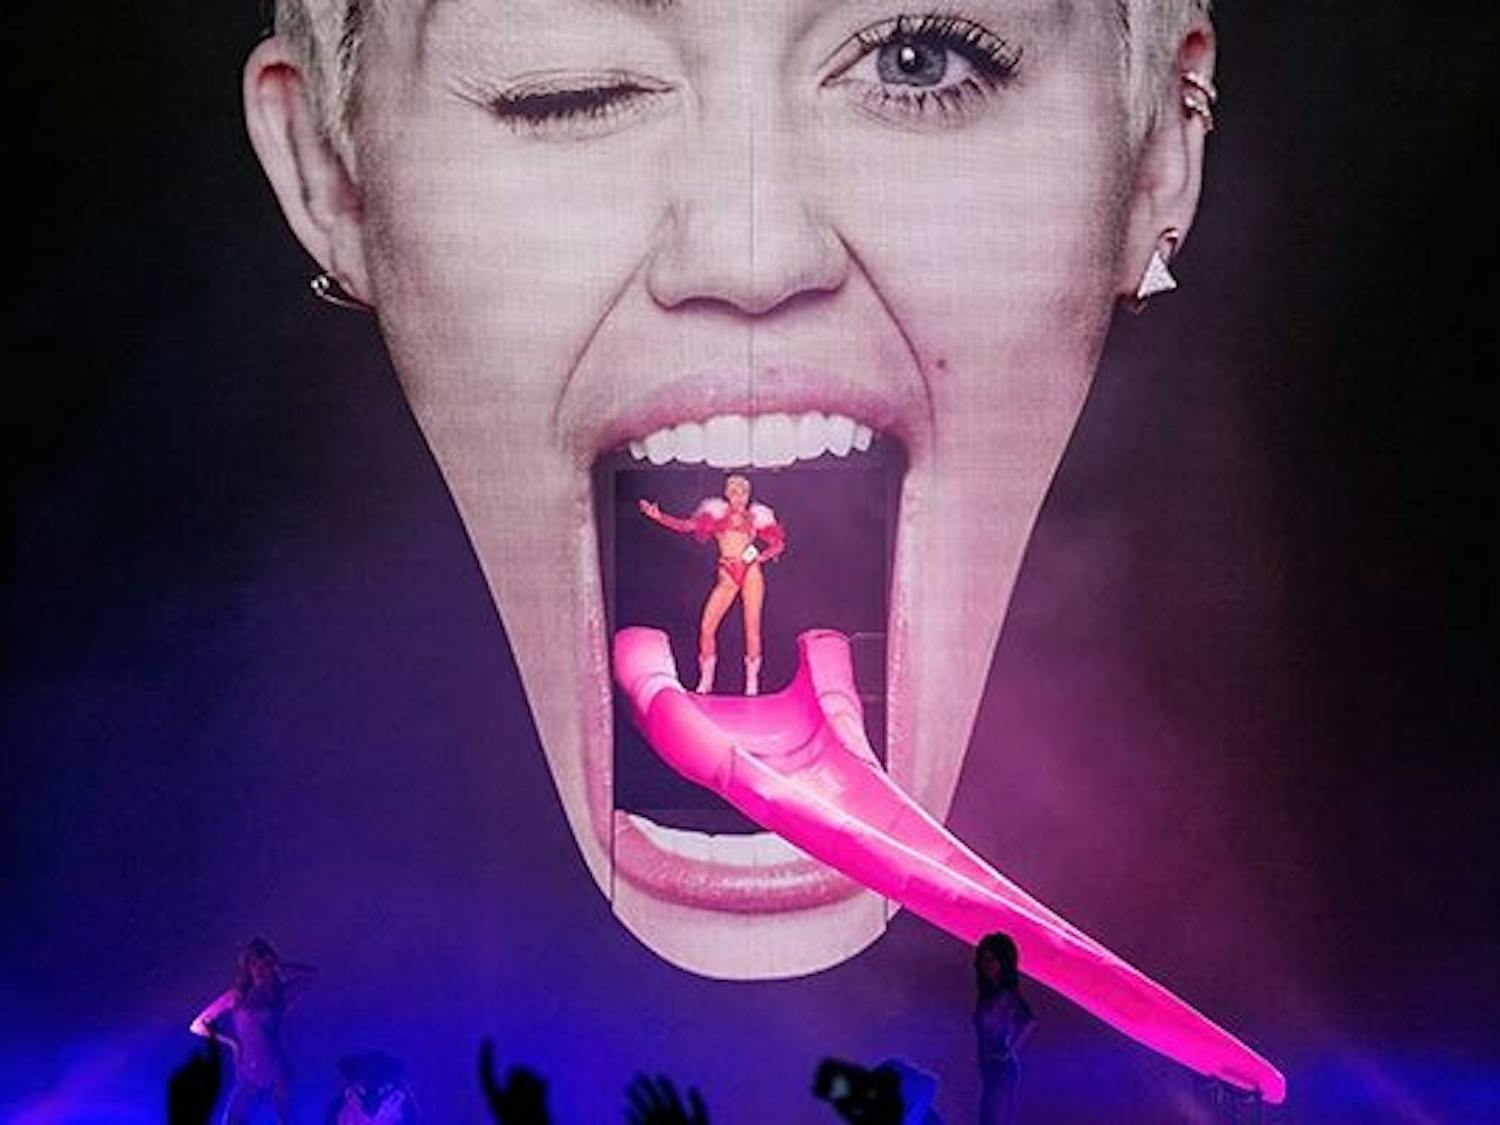 Miley Cyrus performs on her "Bangerz Tour" in 2014.